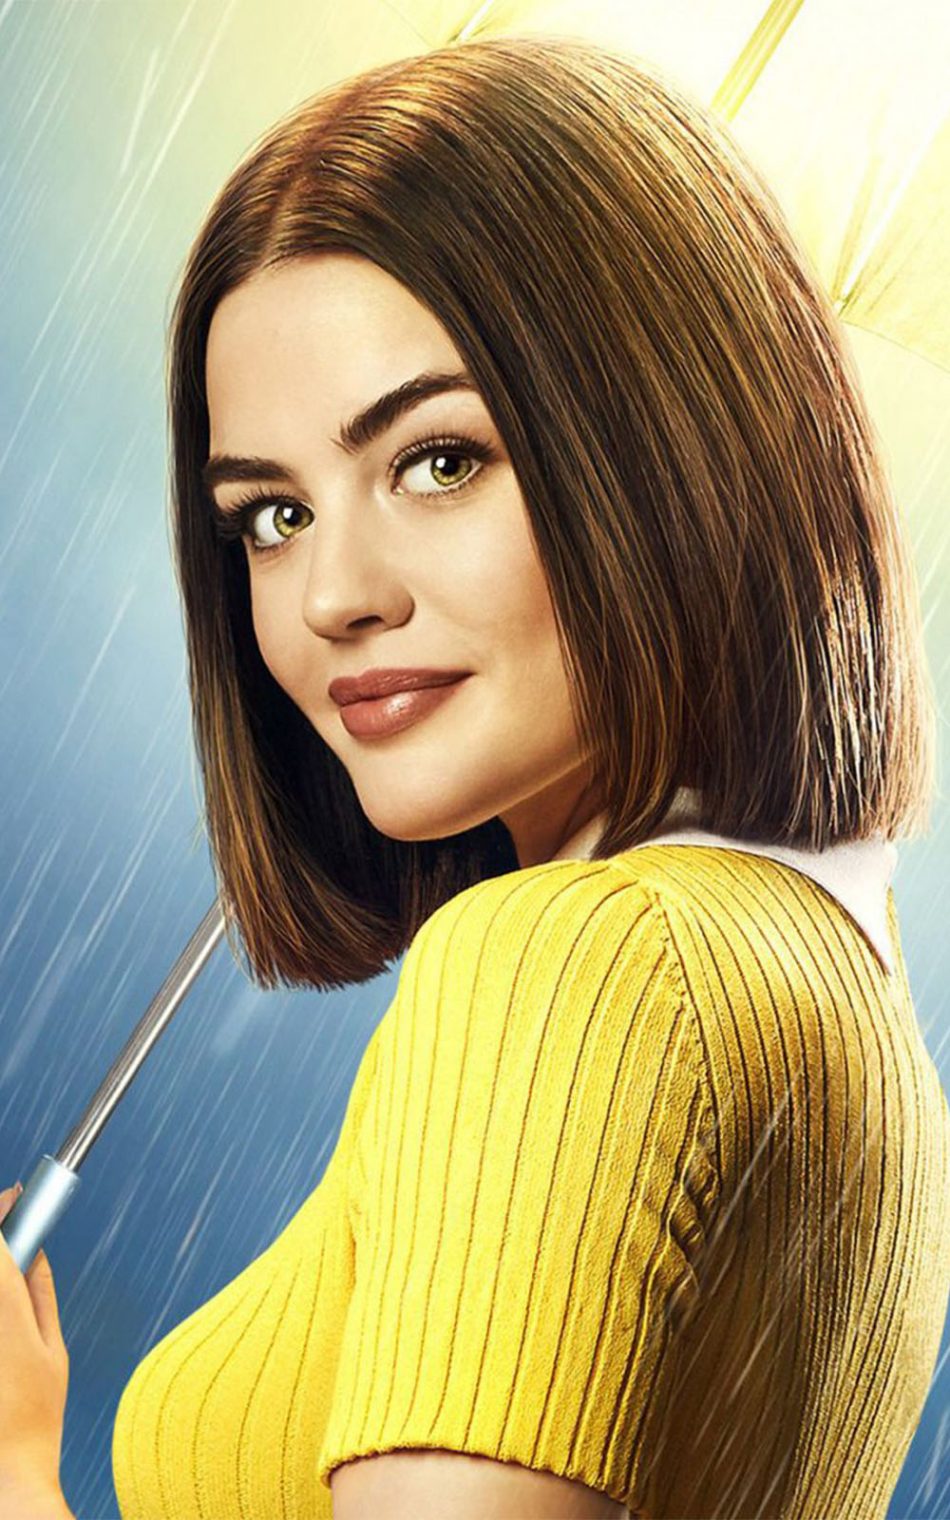 Lucy Hale In Life Sentence Series HD Mobile Wallpaper